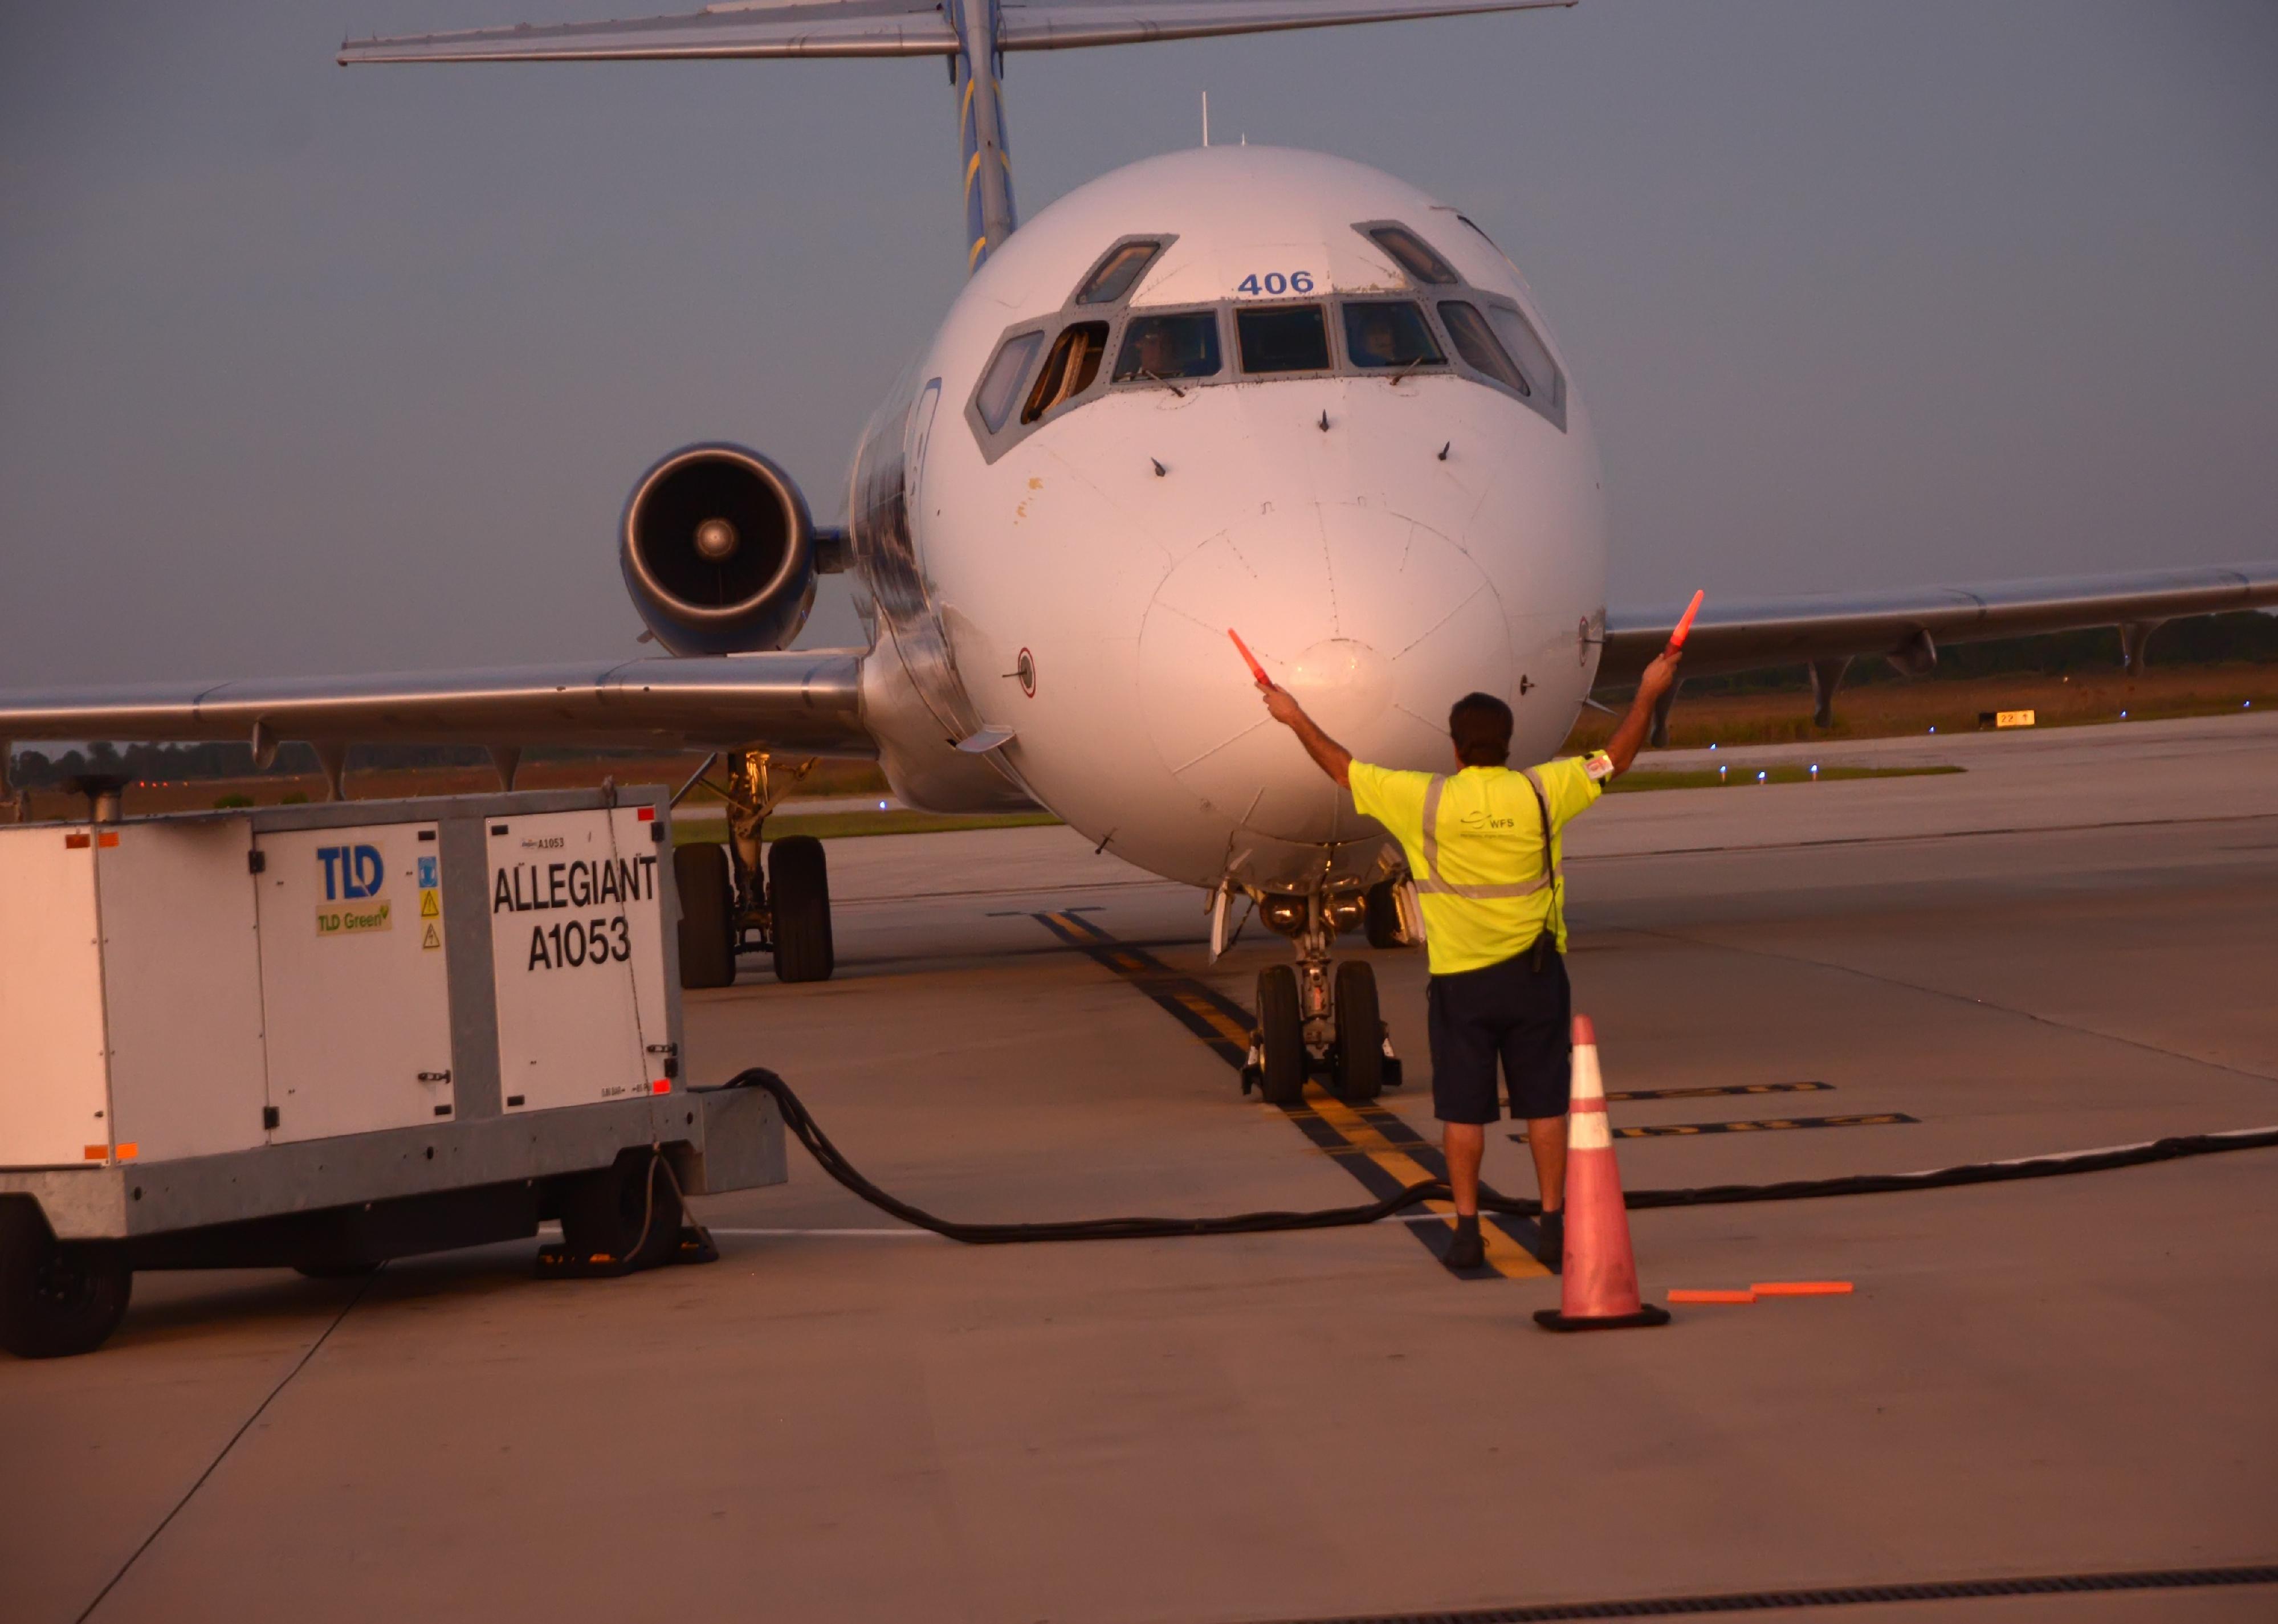 An airport employee directs a plane that just landed at Punta Gorda airport.